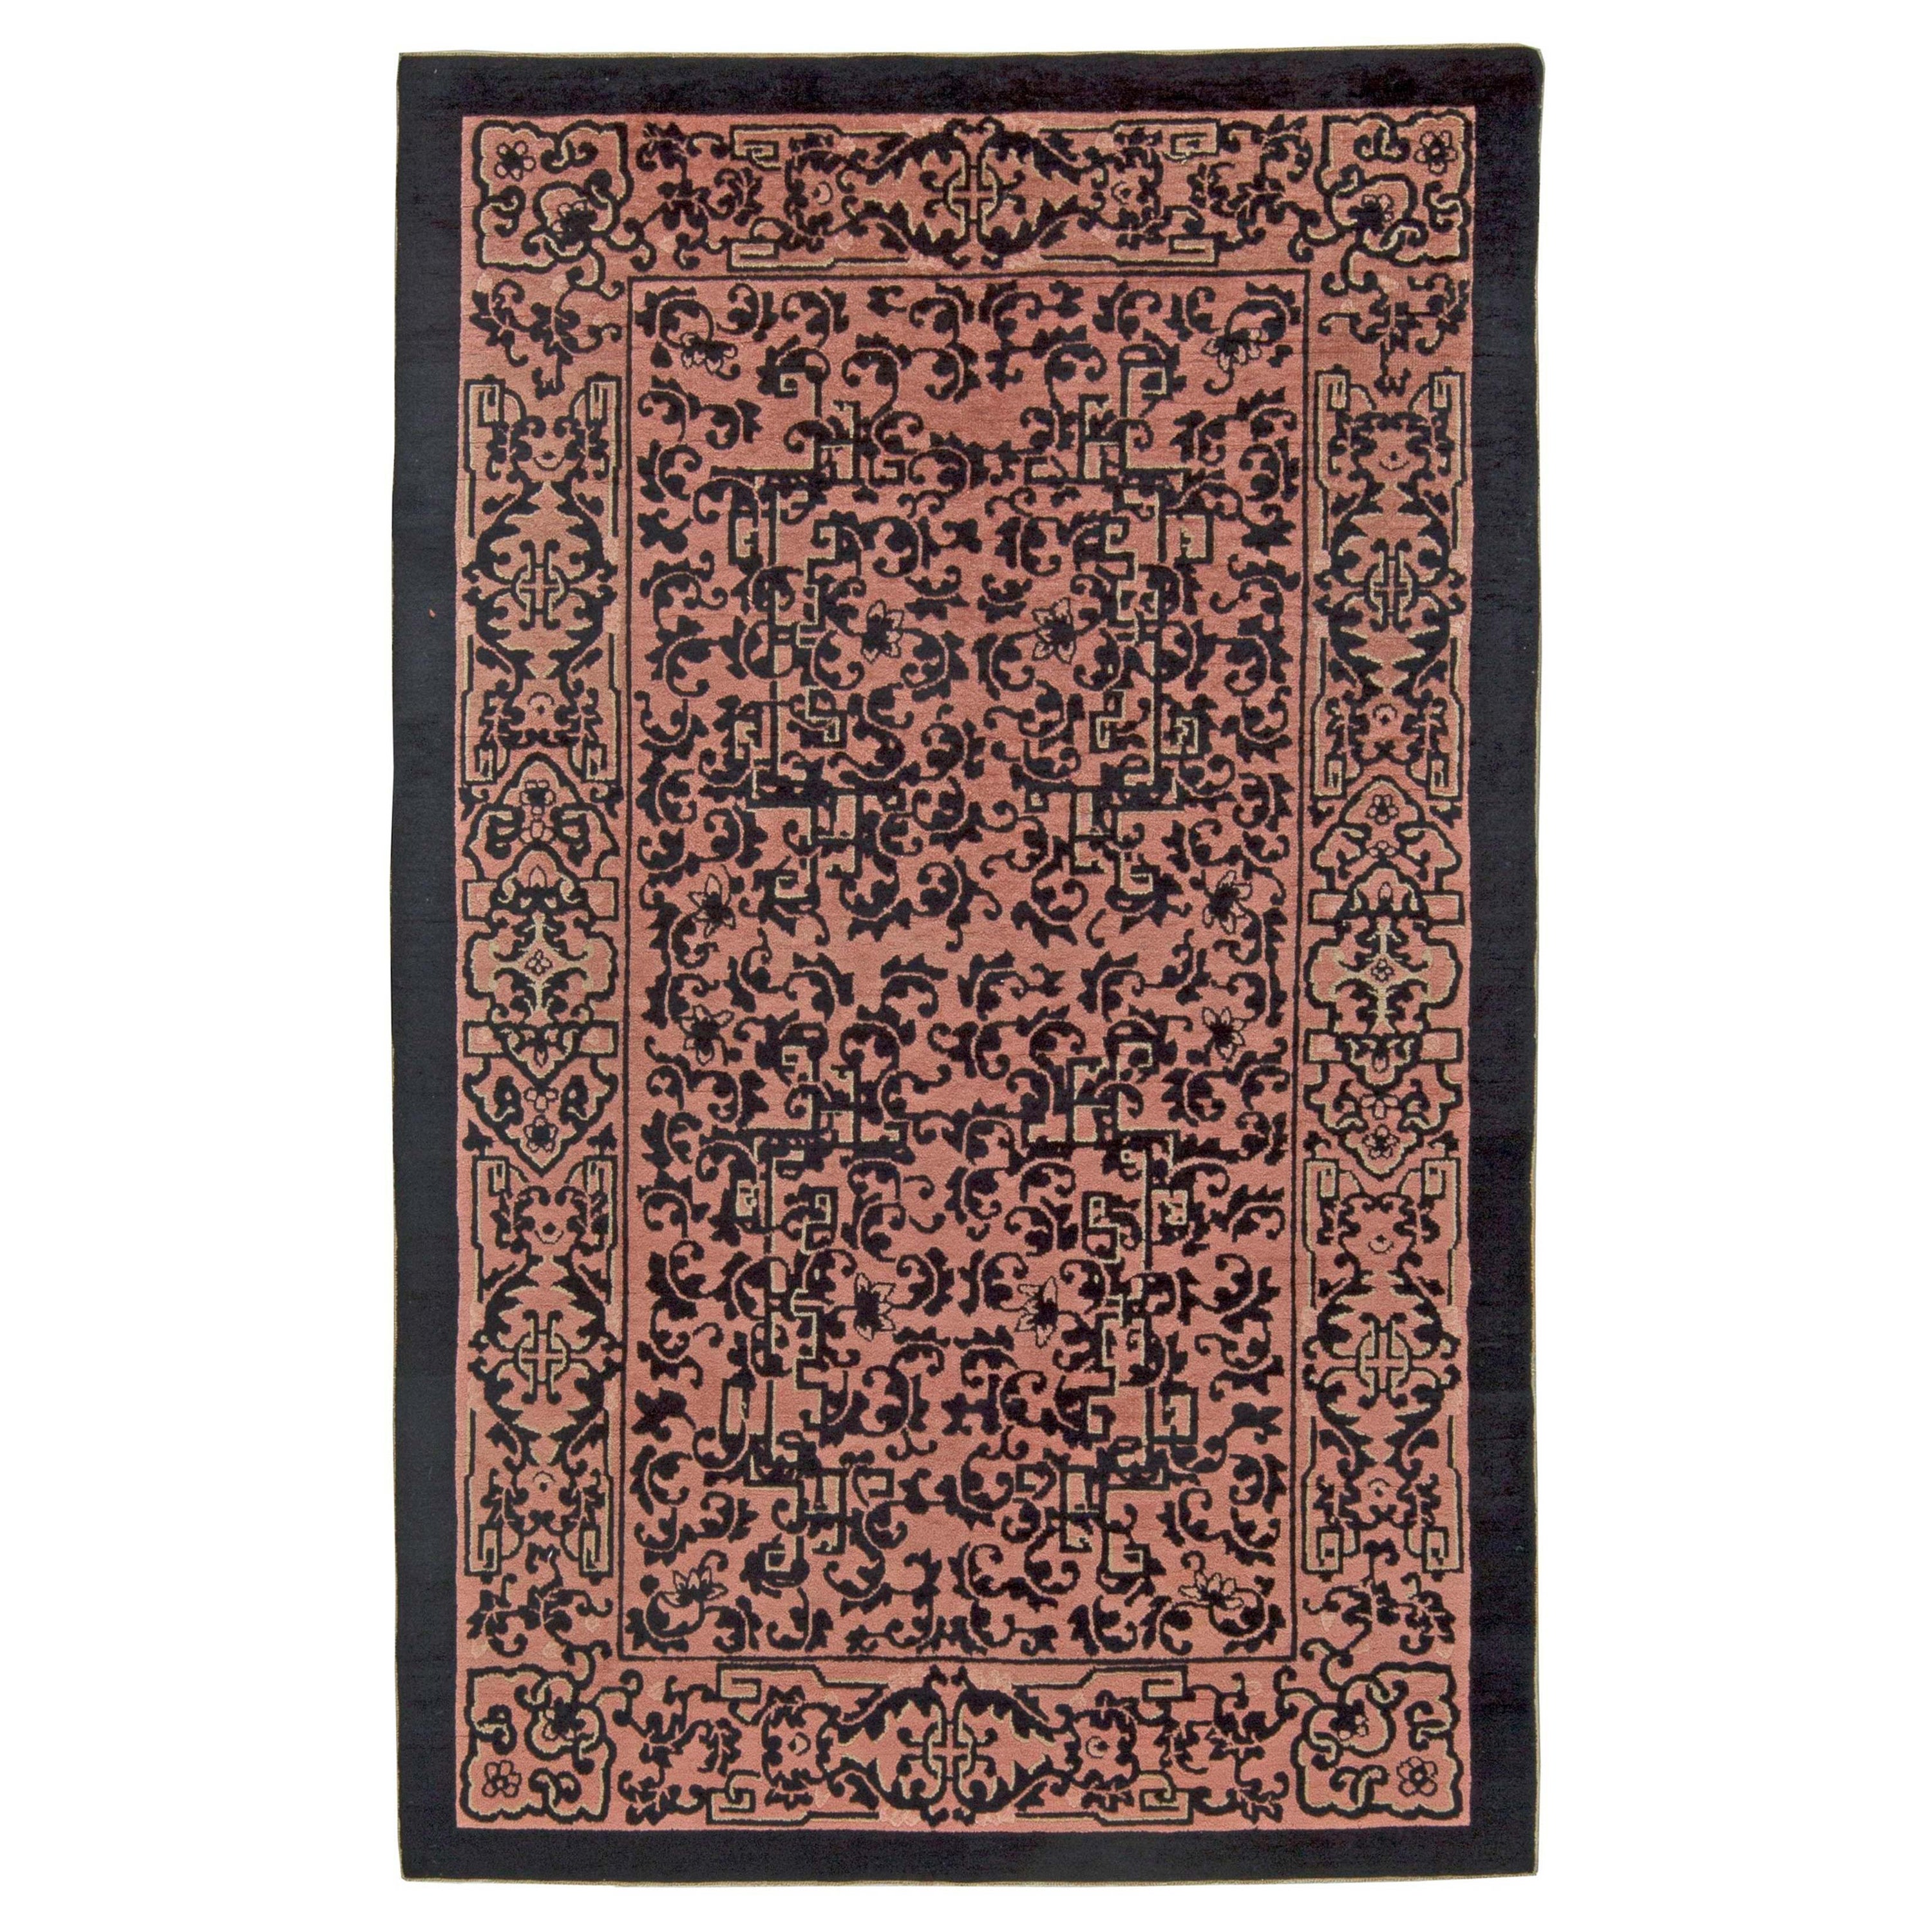 Early 20th Century Chinese Black and Pink Wool Rug